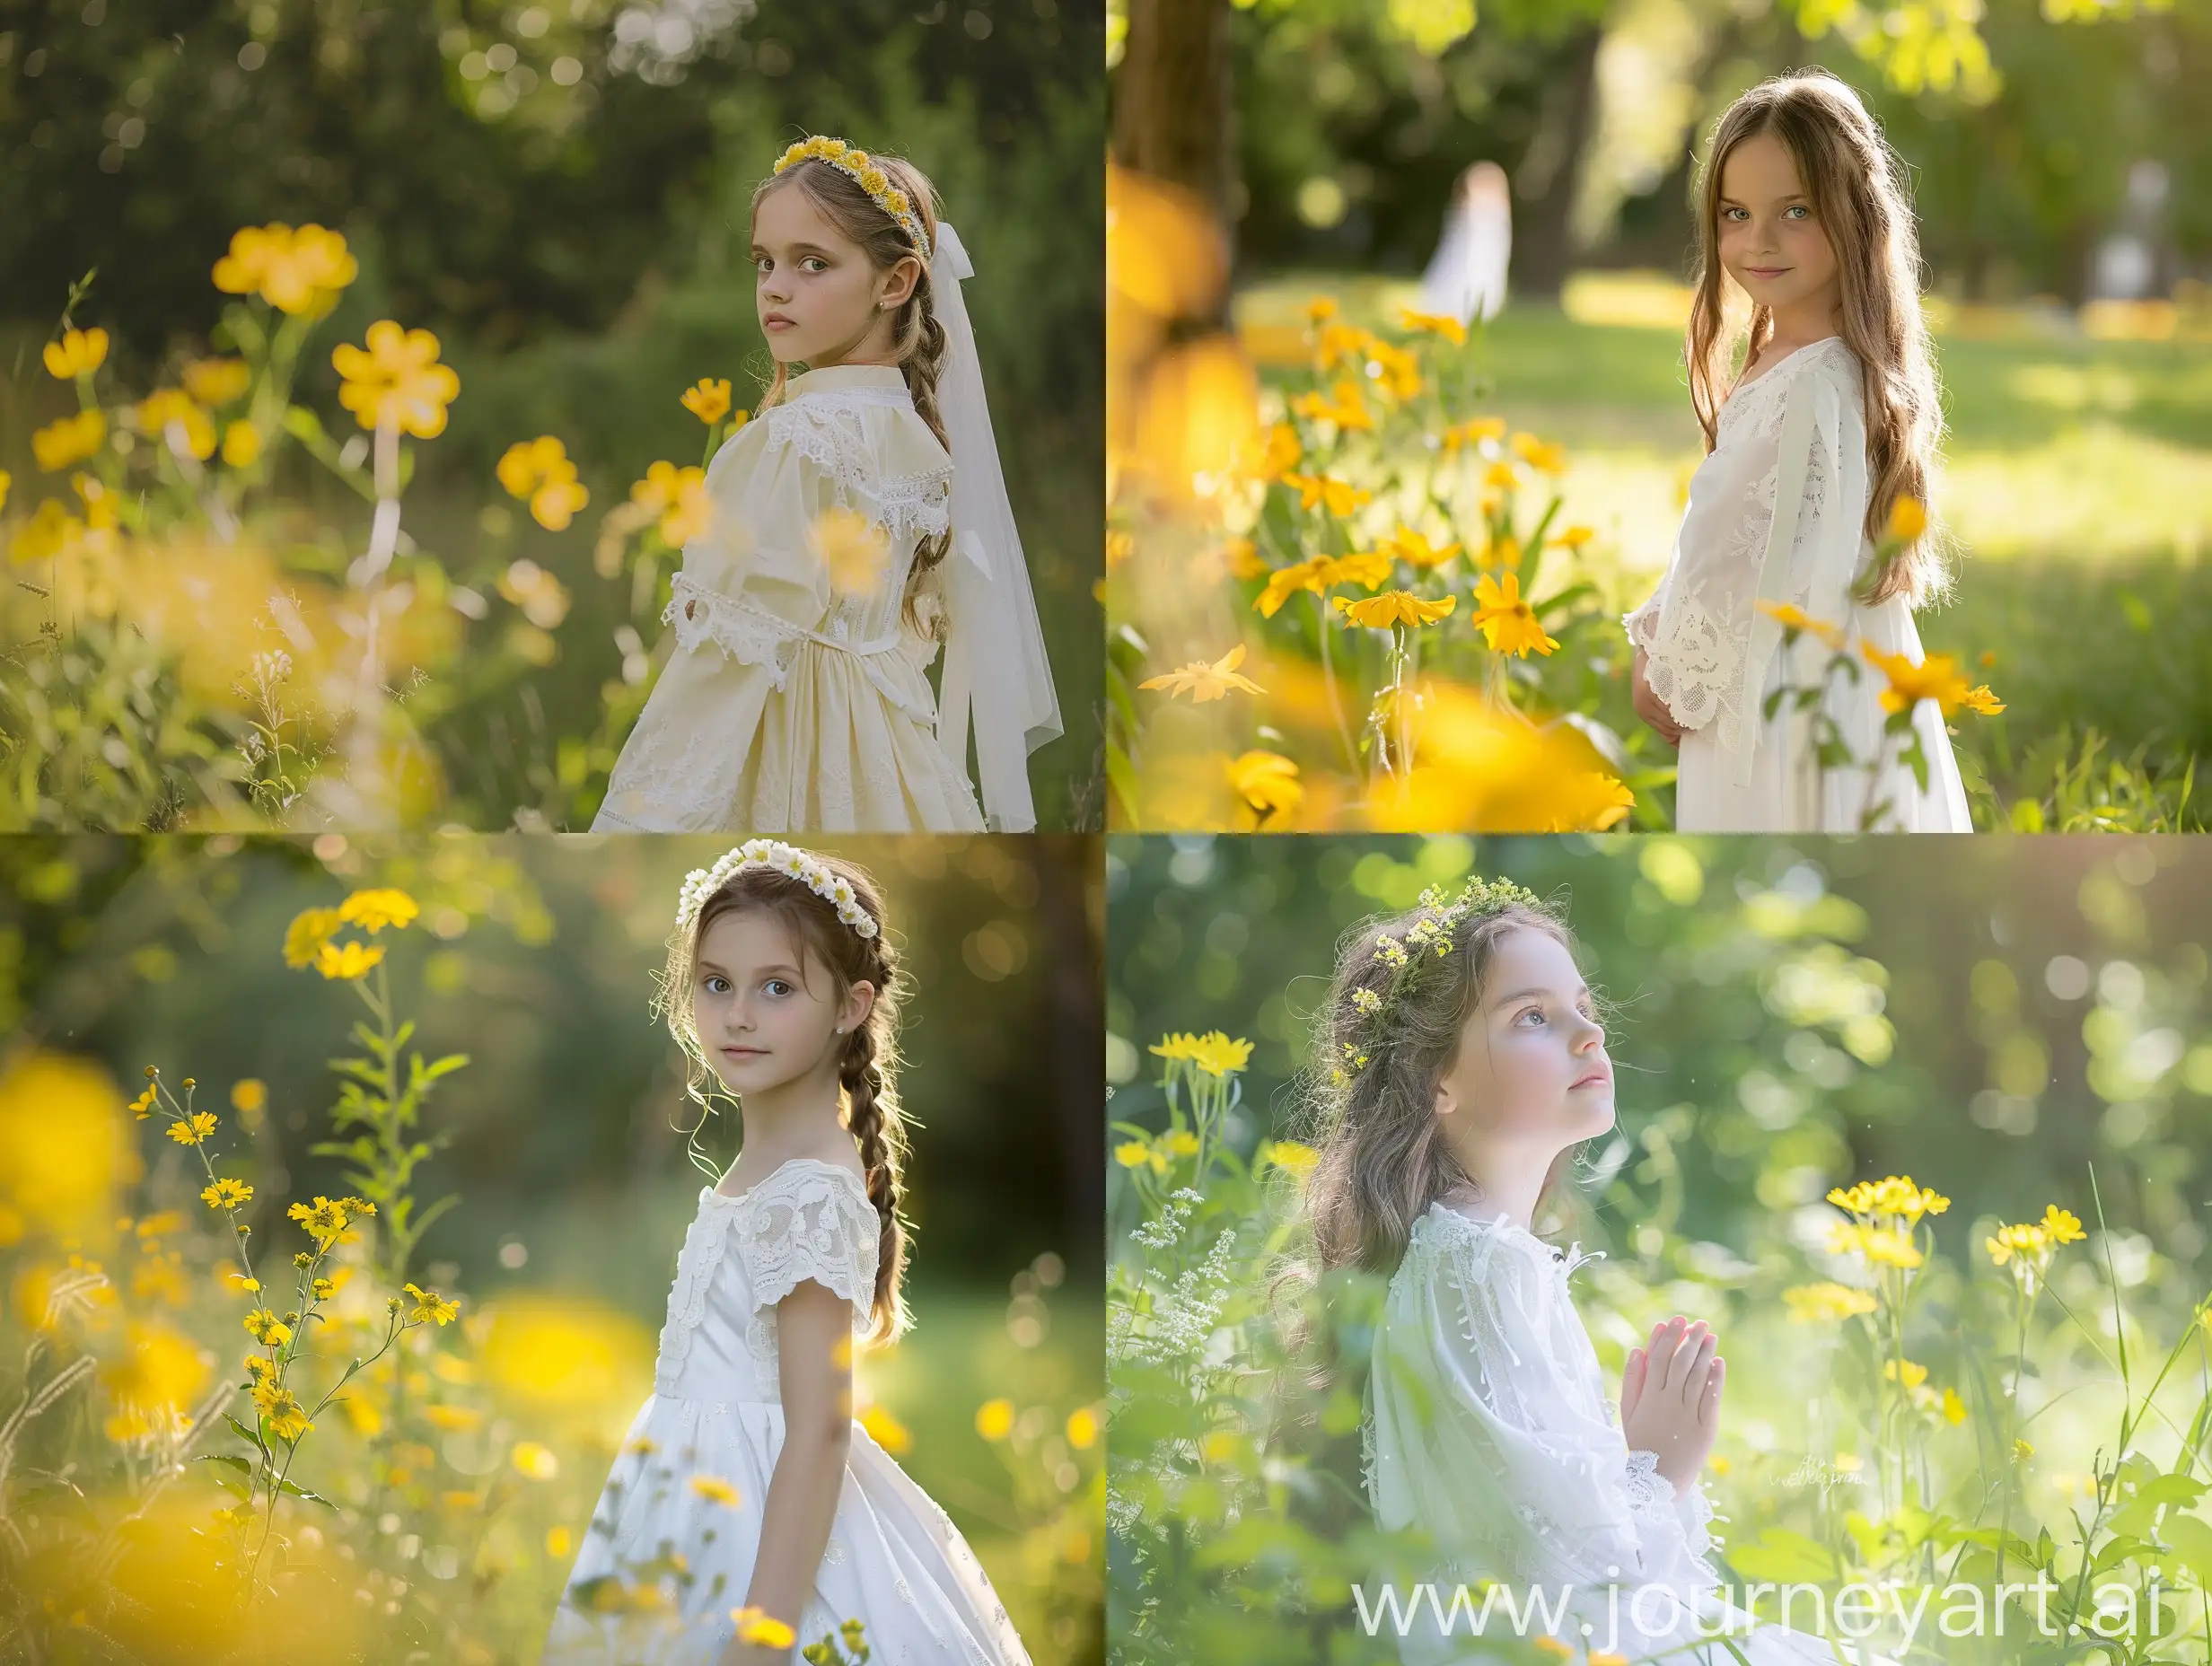 photo session in the park , flower , first communion phots, yellow flowers , girl from the distance in natural alba communion  dress , 